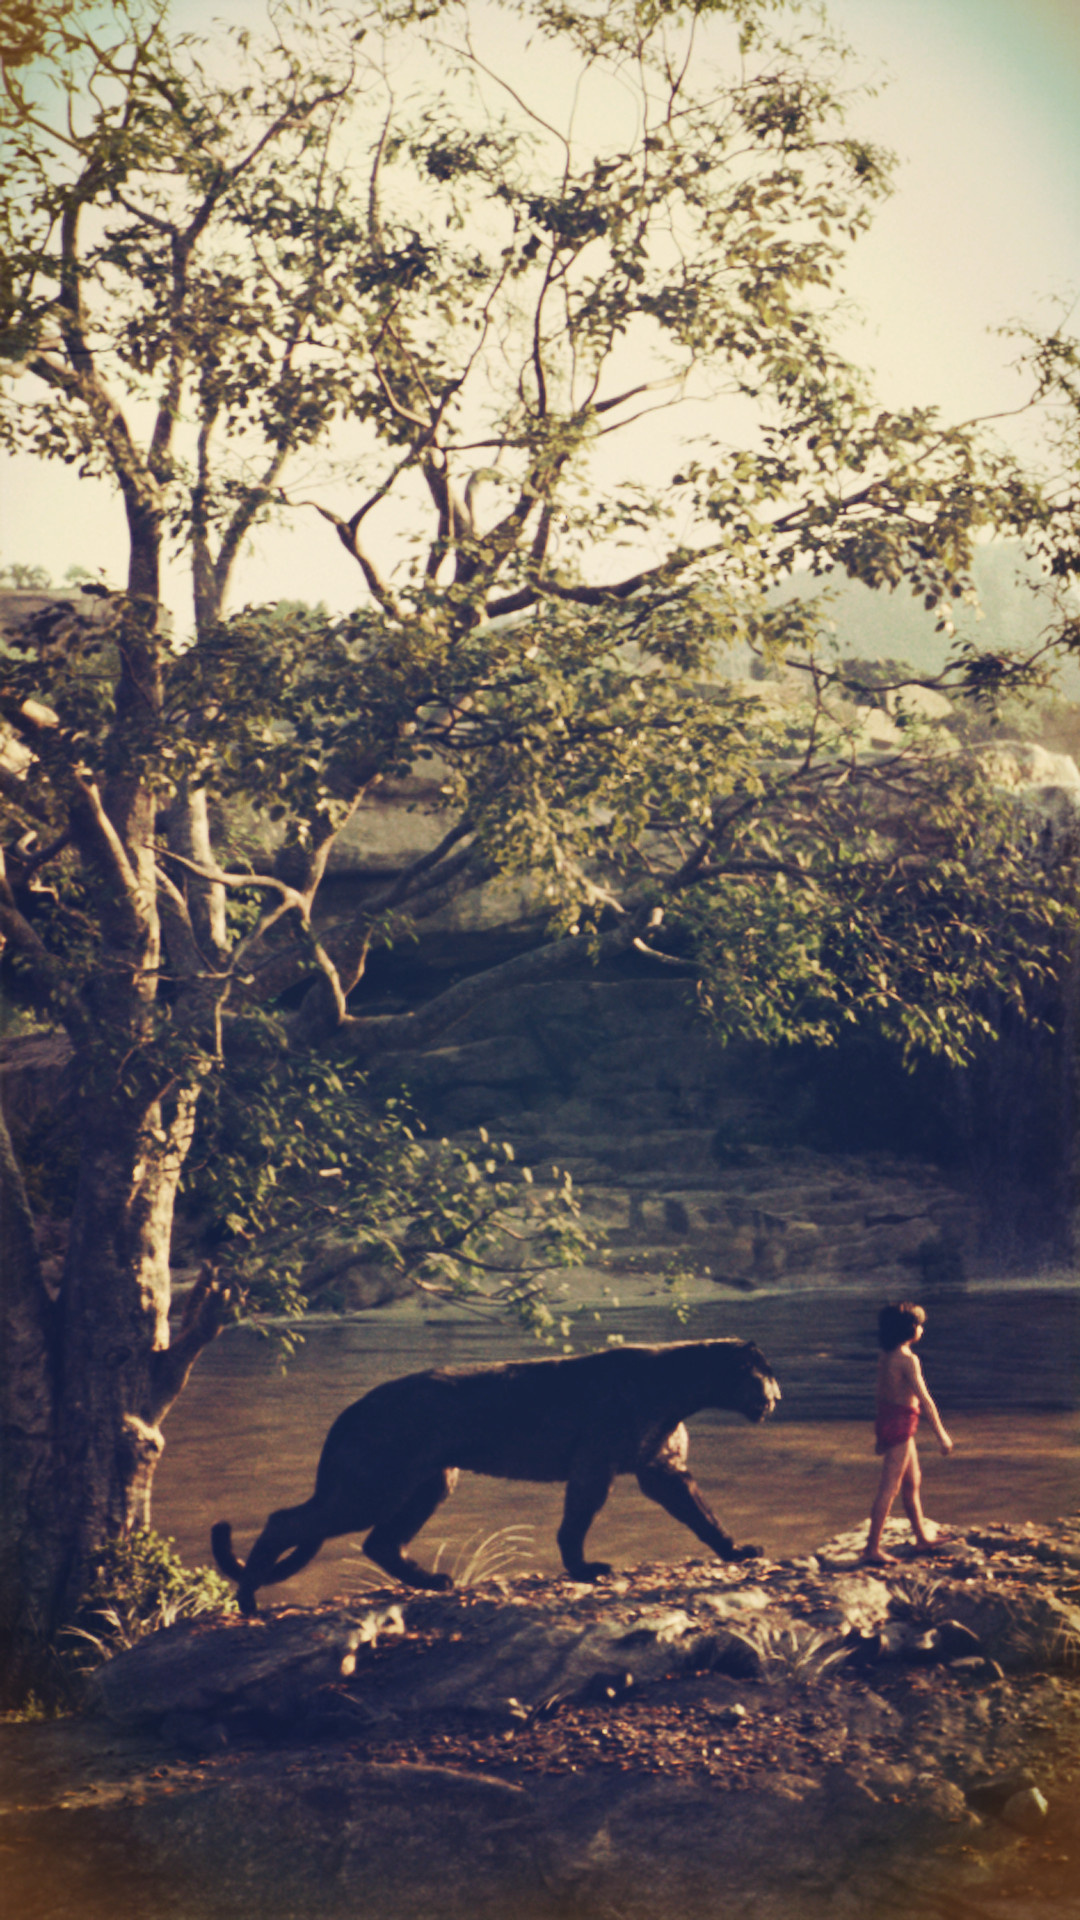 The Jungle Book movie, Inspiring wallpapers, Lively jungle, Breathtaking beauty, 1080x1920 Full HD Phone